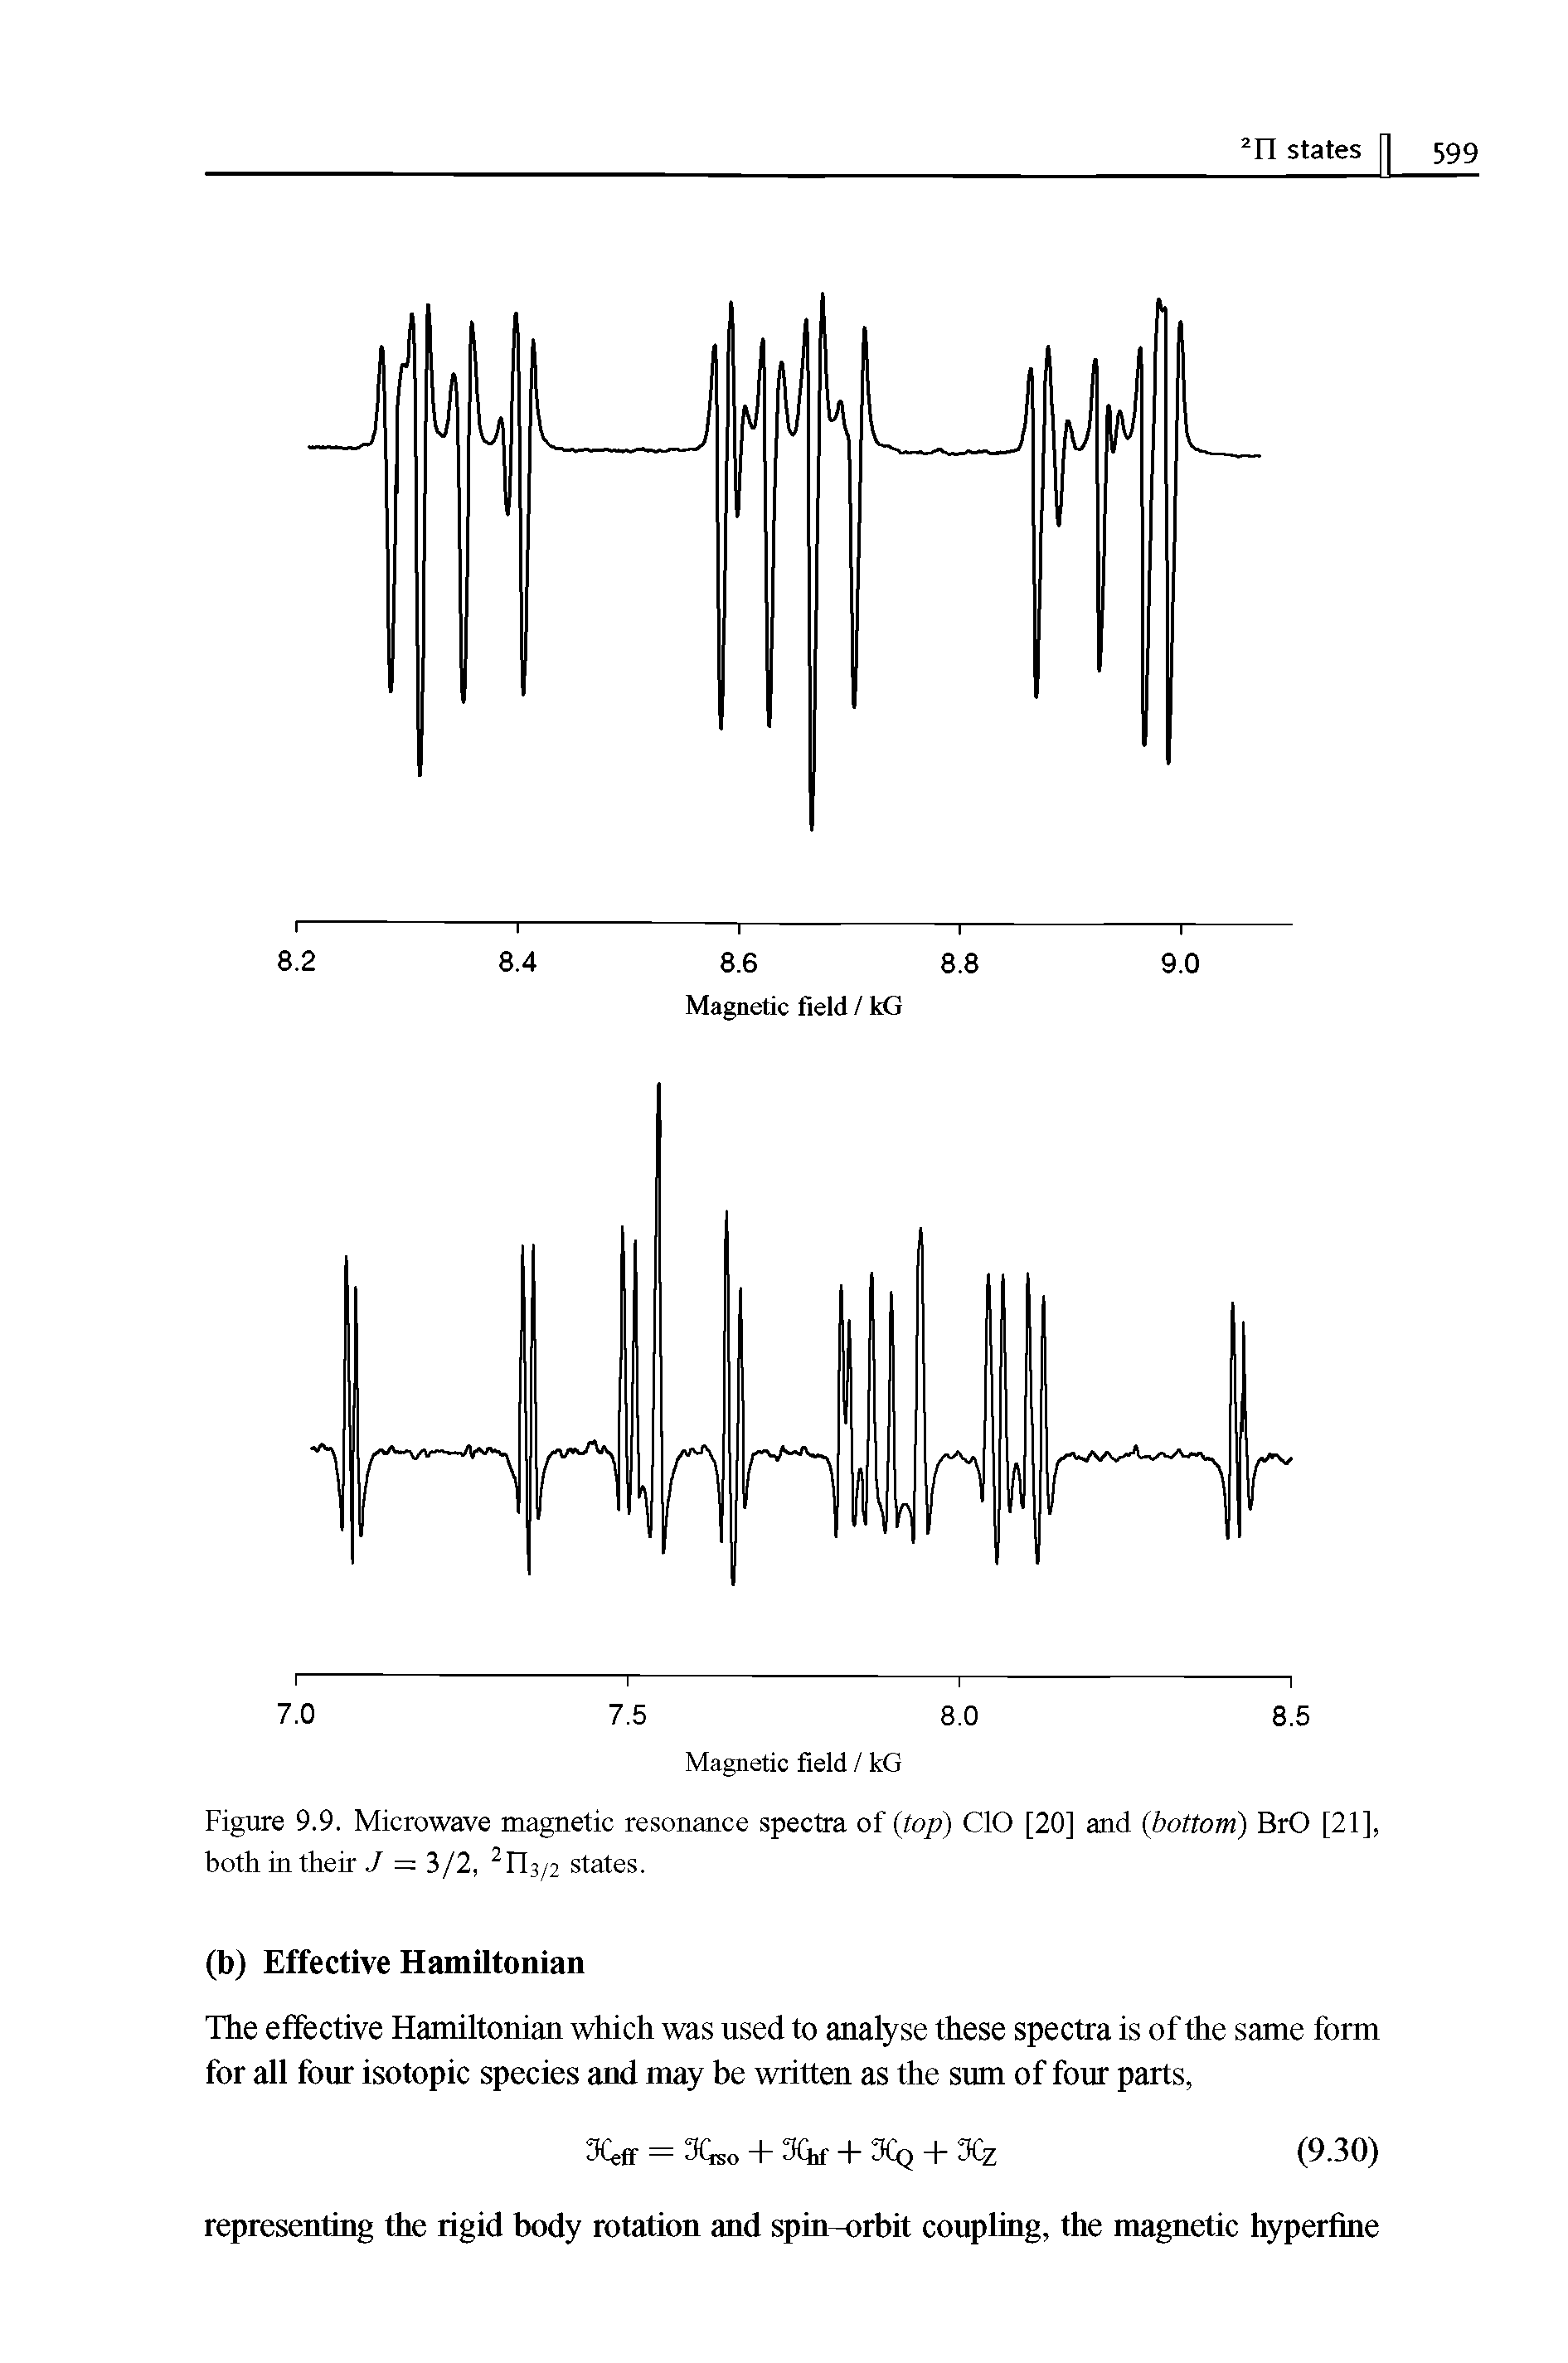 Figure 9.9. Microwave magnetic resonance spectra of top) CIO [20] and (bottom) BrO [21], both in their J = 3/2, 2n3/2 states.